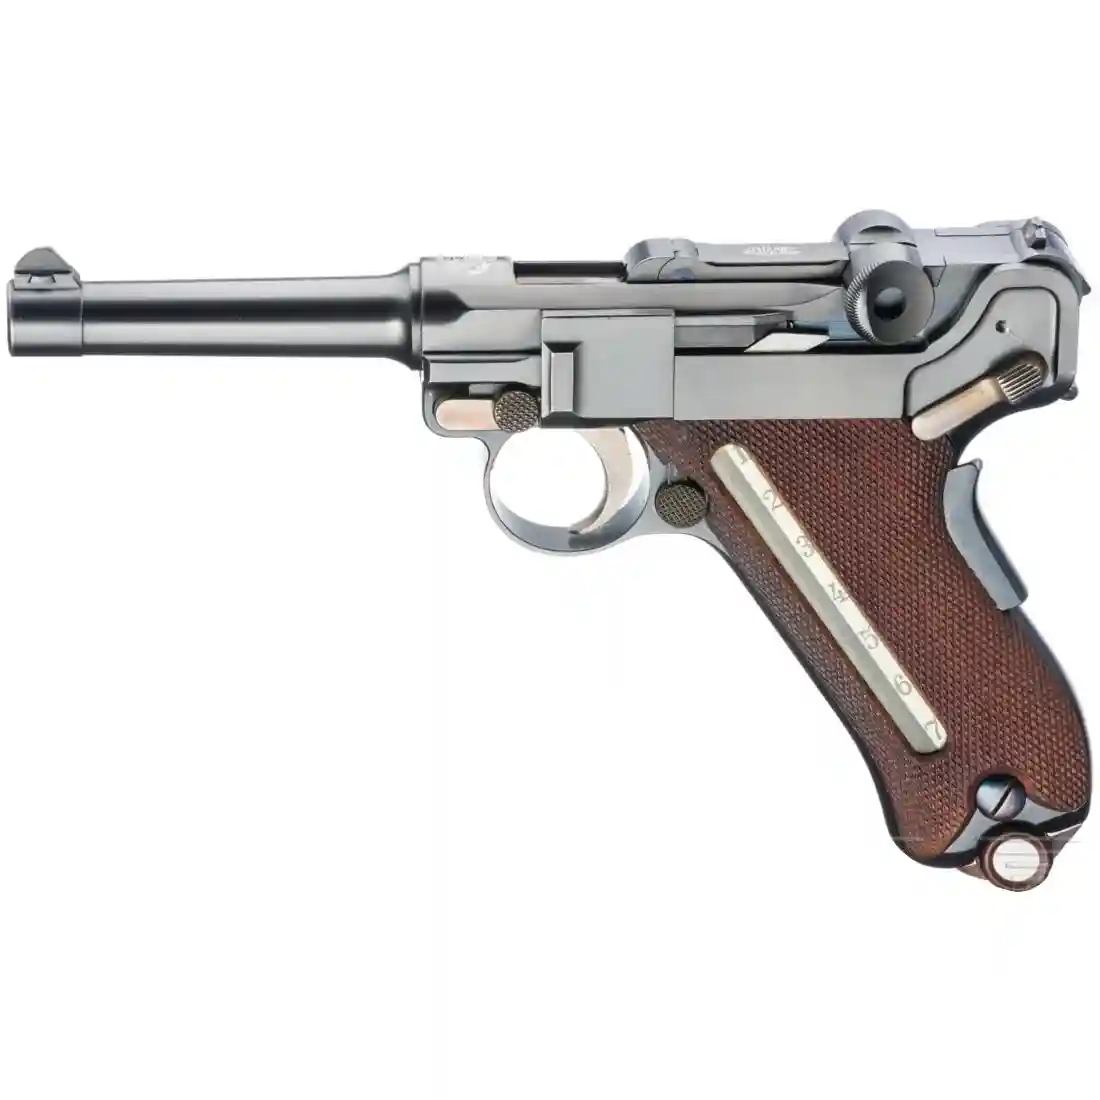 DWM Parabellum Model 1902 9MM Luger used in U.S. Army Trials and later restored, estimated at €28,000-€56,000 ($29,960-$59,920) at Hermann Historica.